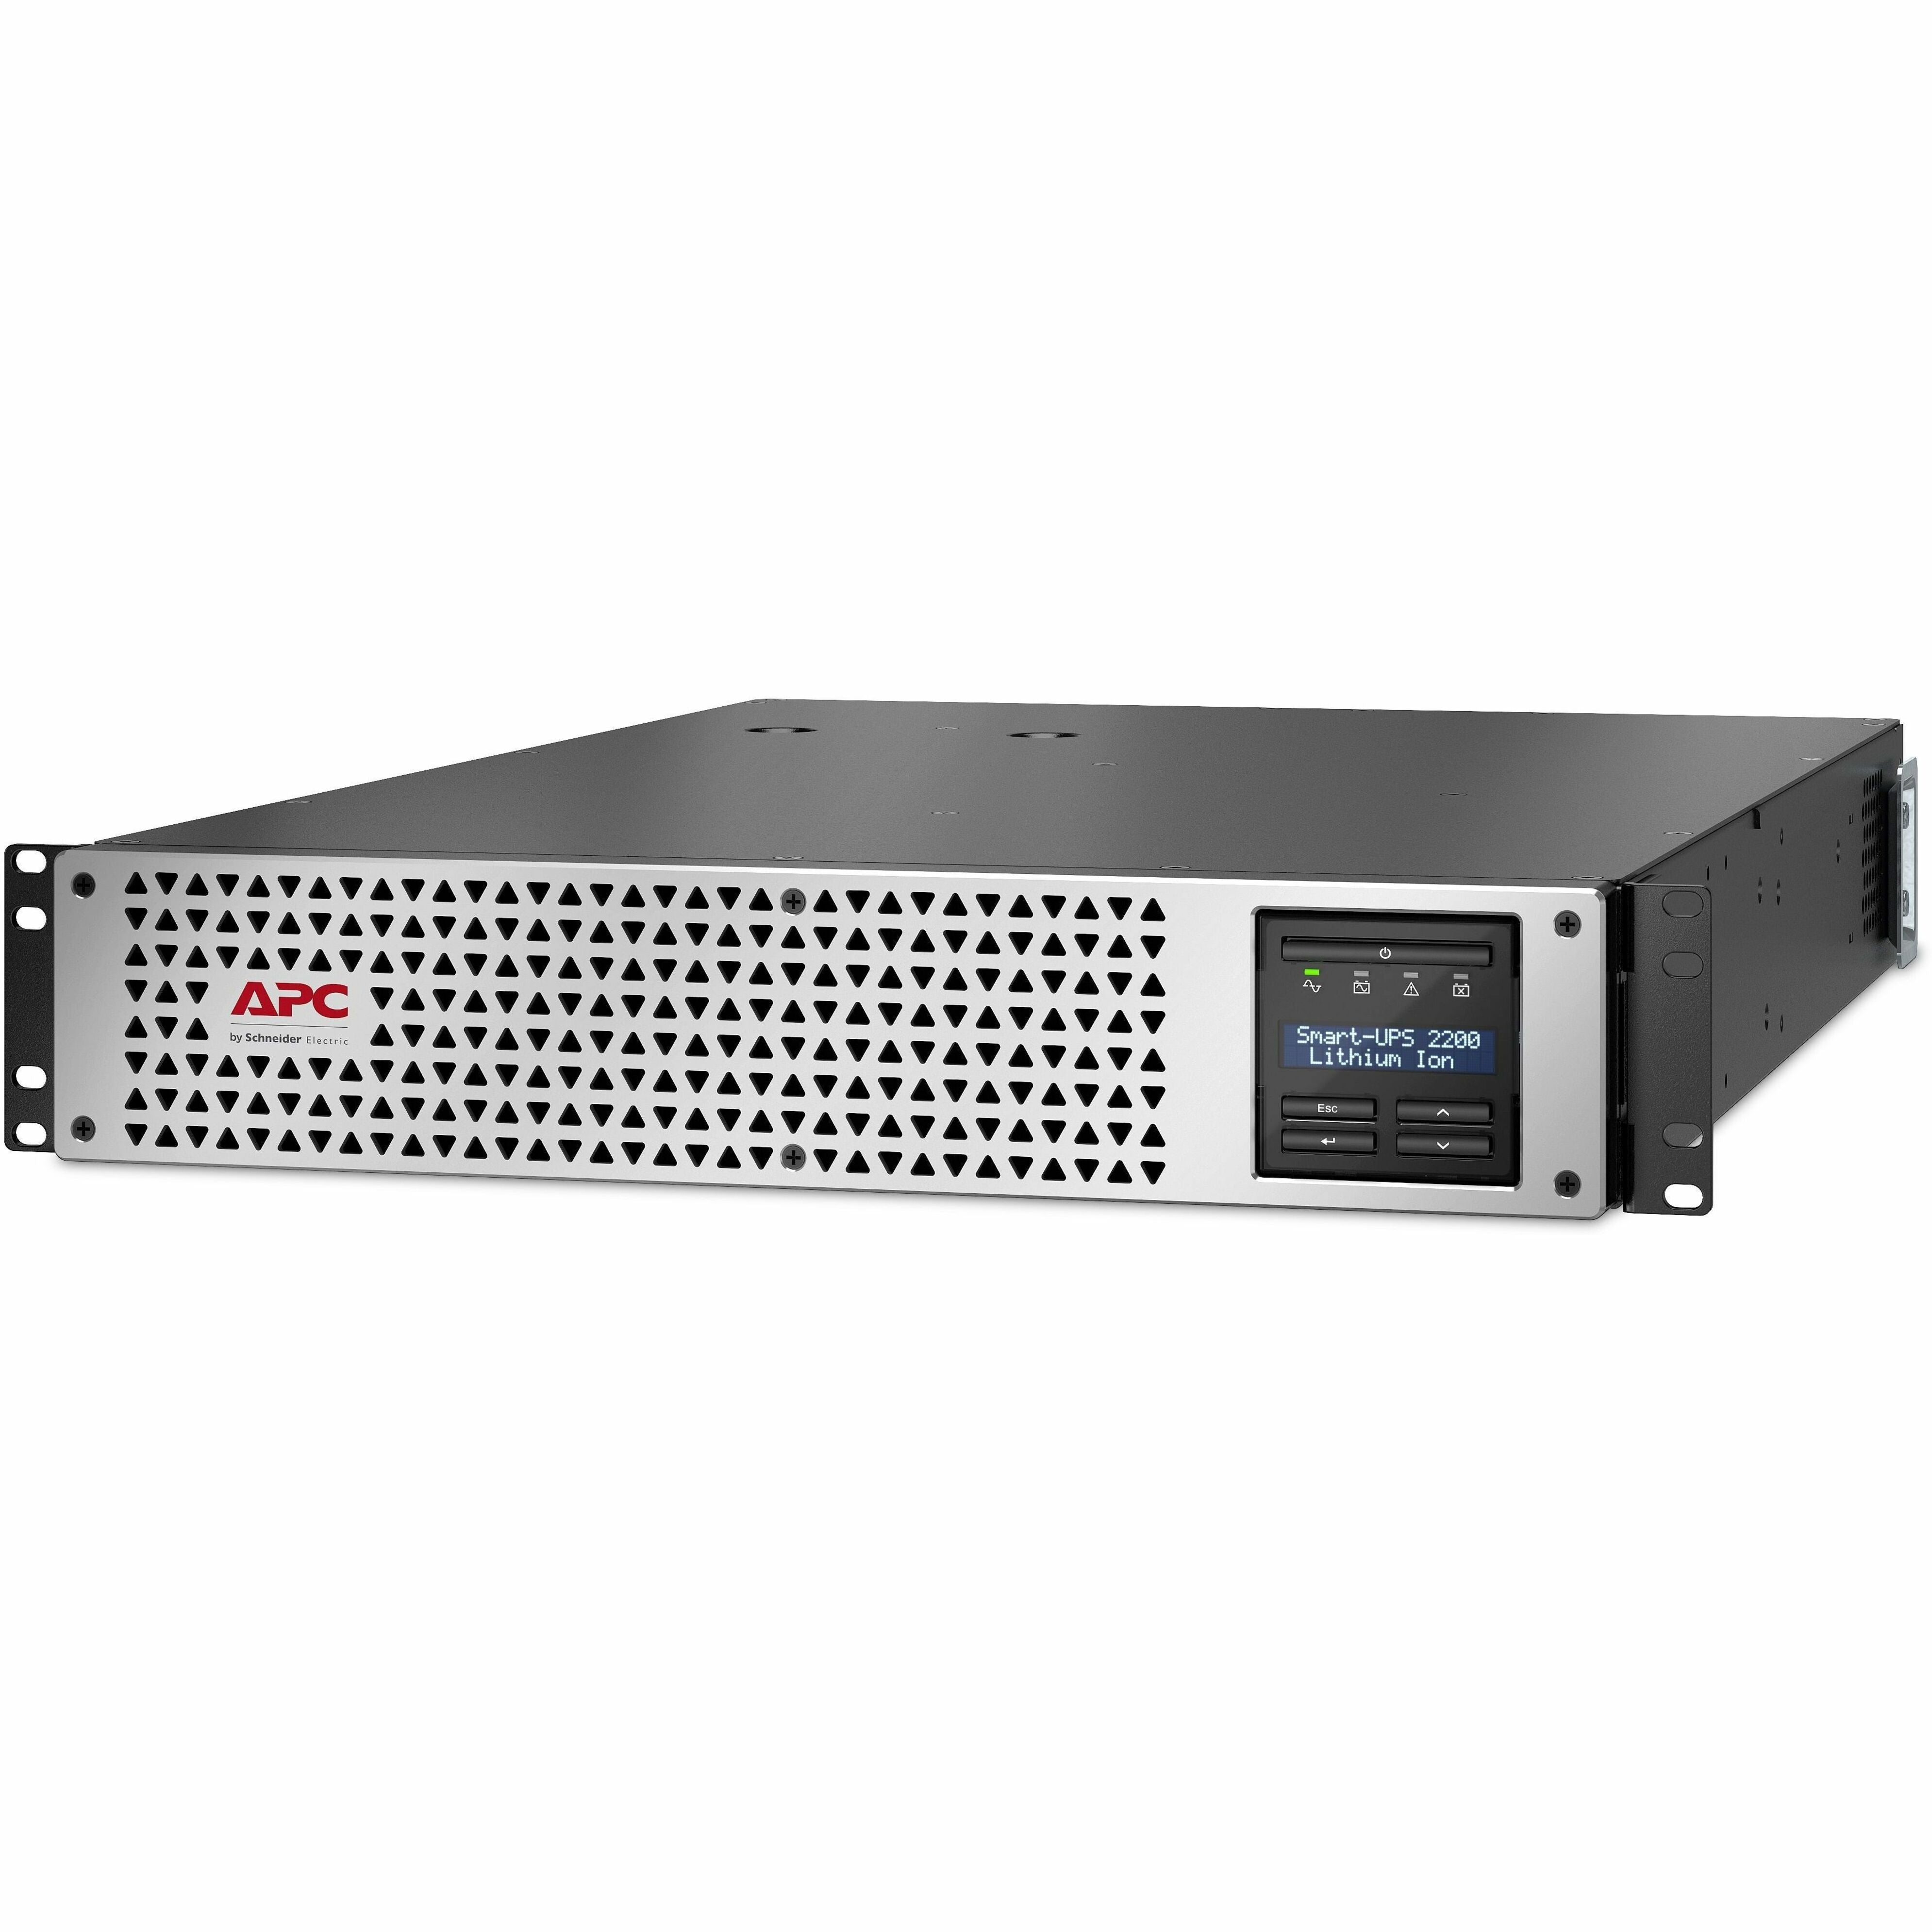 APC SMTL2200RM2UCNC Smart-UPS Lithium-Ion 2200VA 120V with SmartConnect Port and Network Card, 5-Year Warranty